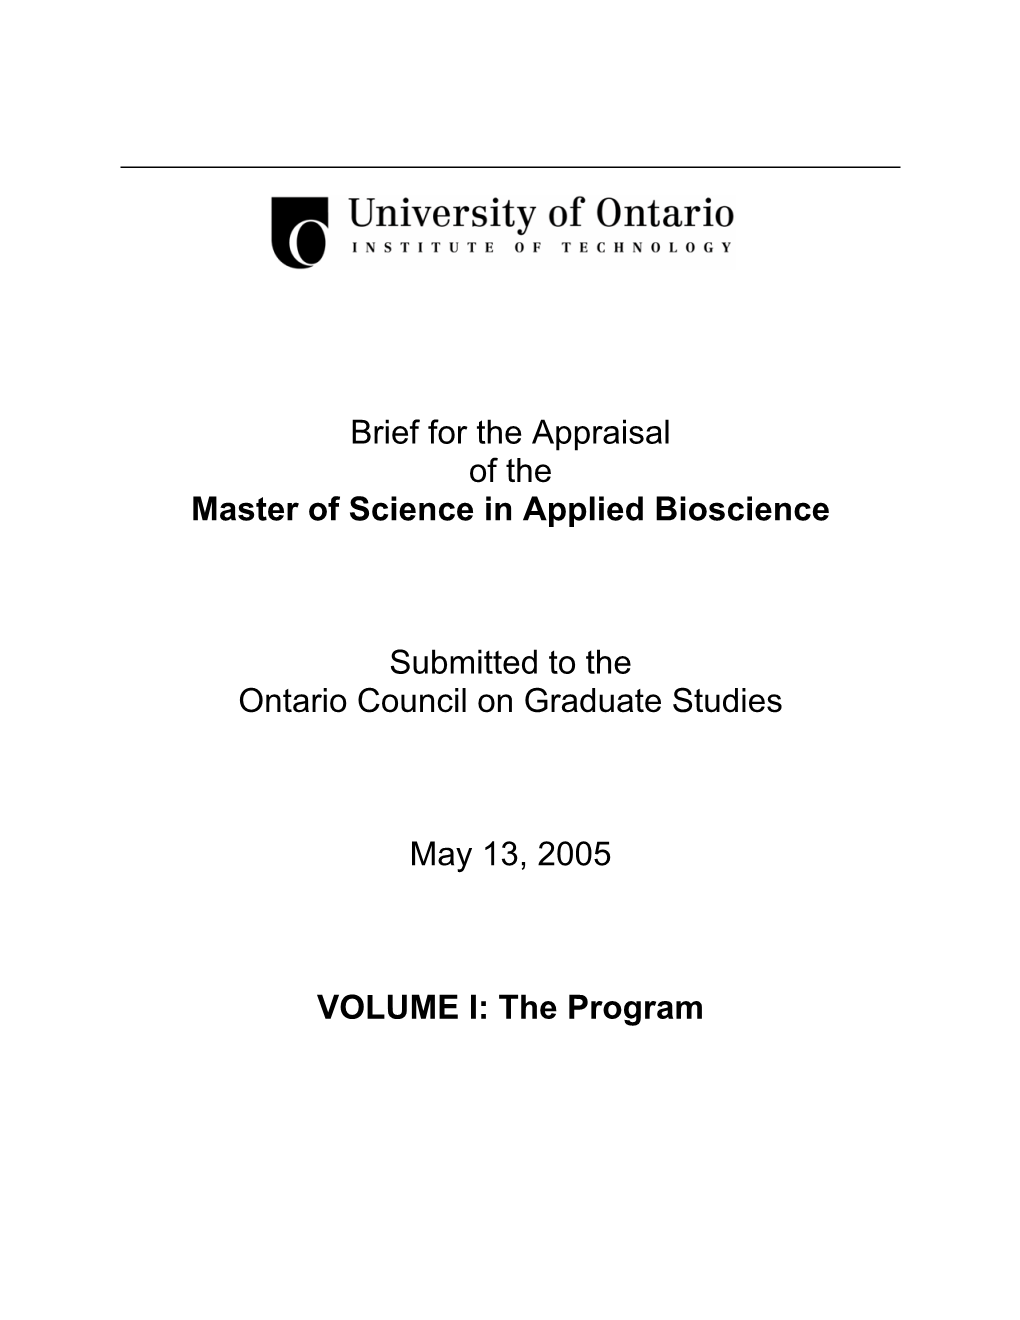 Brief for the Appraisal of the Master of Science in Applied Bioscience